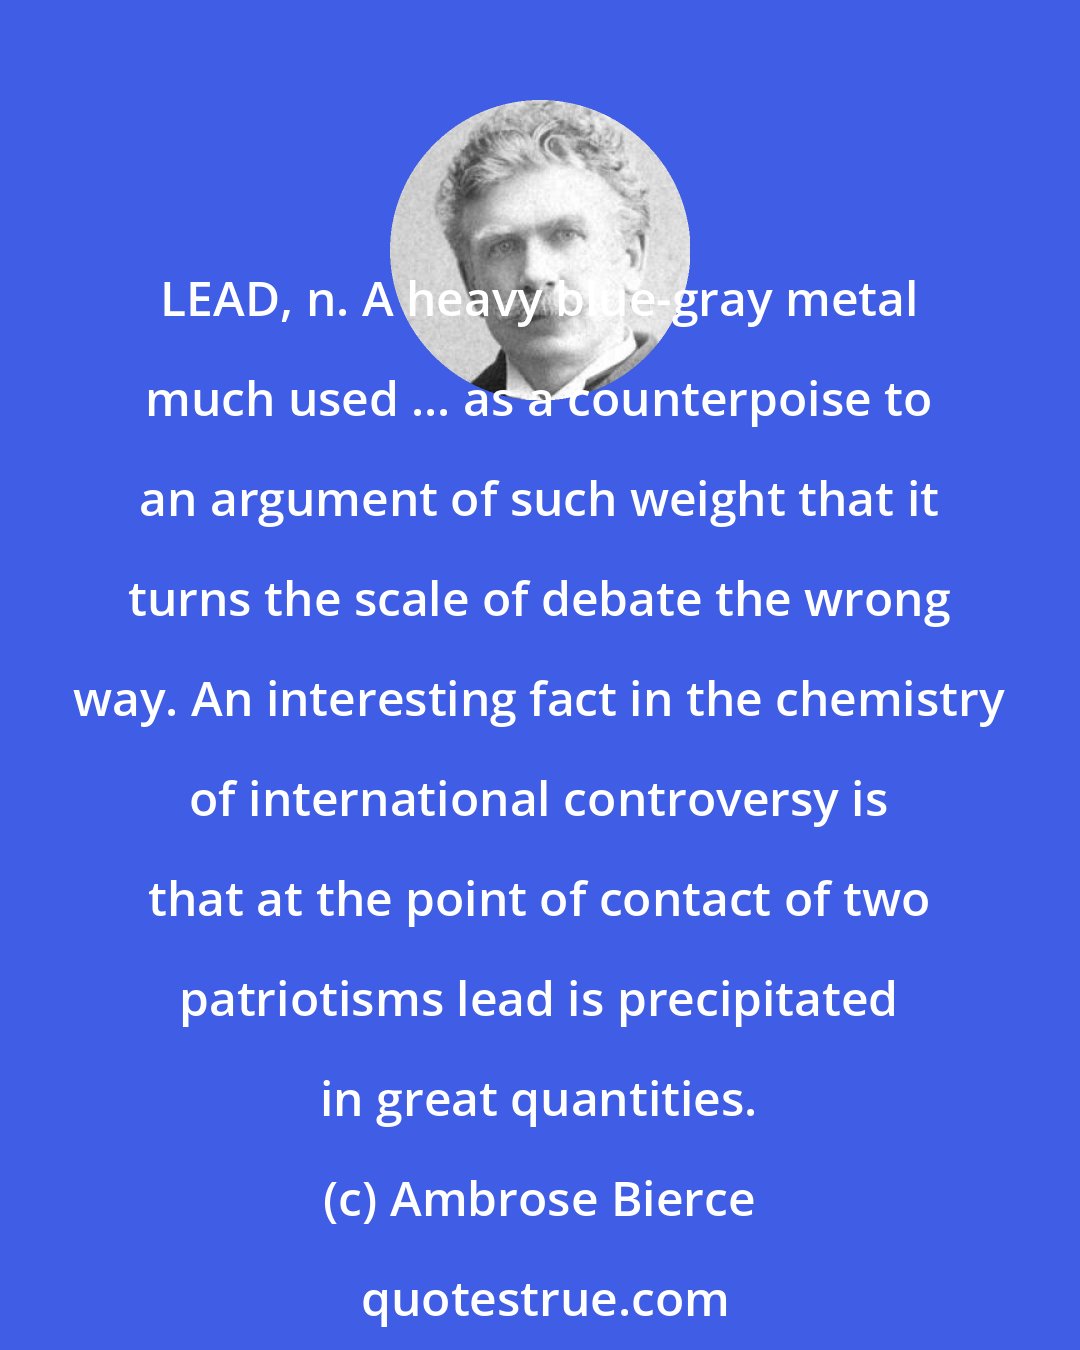 Ambrose Bierce: LEAD, n. A heavy blue-gray metal much used ... as a counterpoise to an argument of such weight that it turns the scale of debate the wrong way. An interesting fact in the chemistry of international controversy is that at the point of contact of two patriotisms lead is precipitated in great quantities.